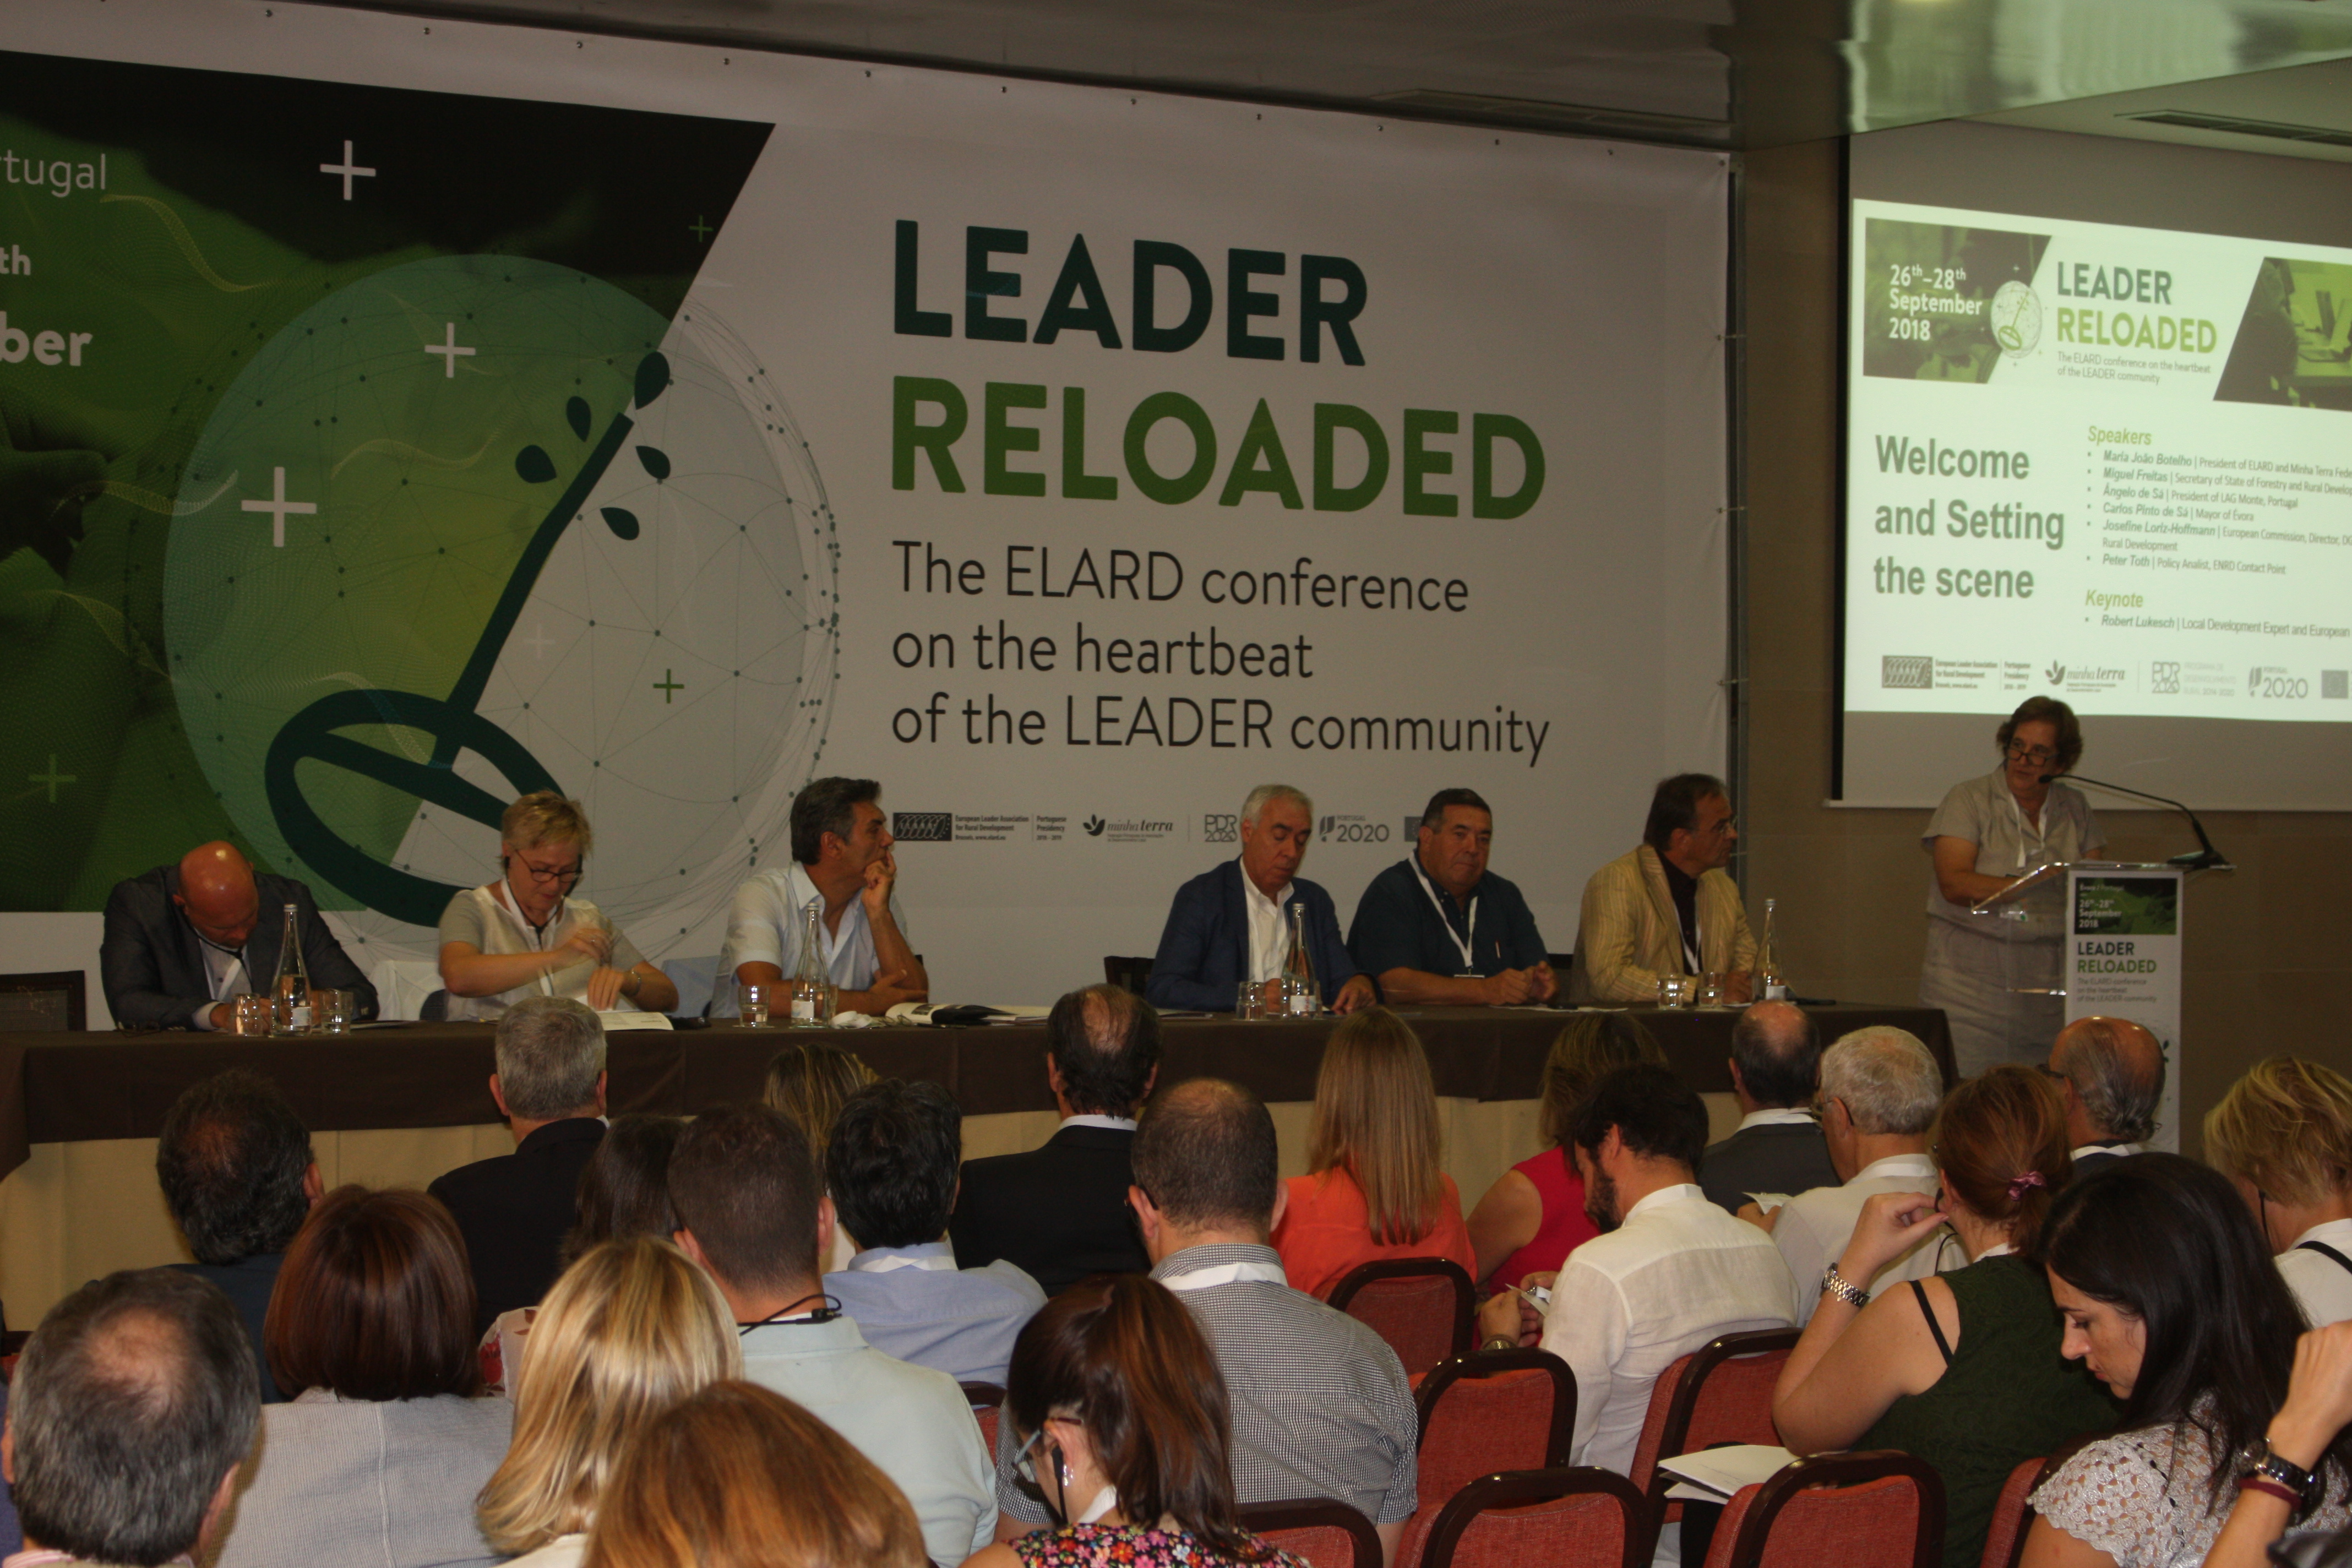 LEADER RELOADED - the ELARD conference on the heartbeat of the LEADER community